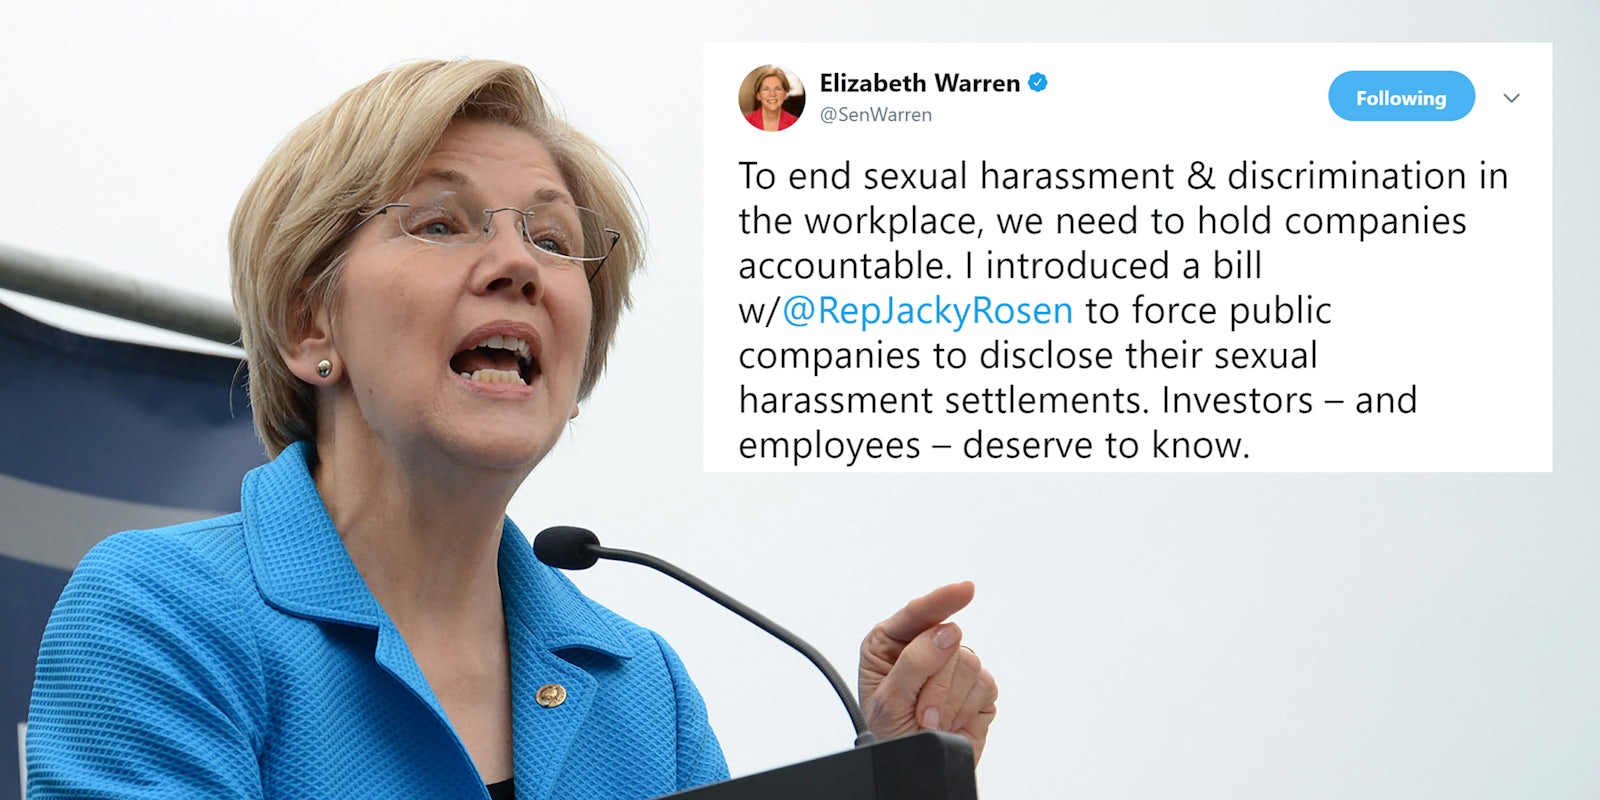 Elizabeth Warren tweets about how to end sexual harassment and discrimination in the workplace